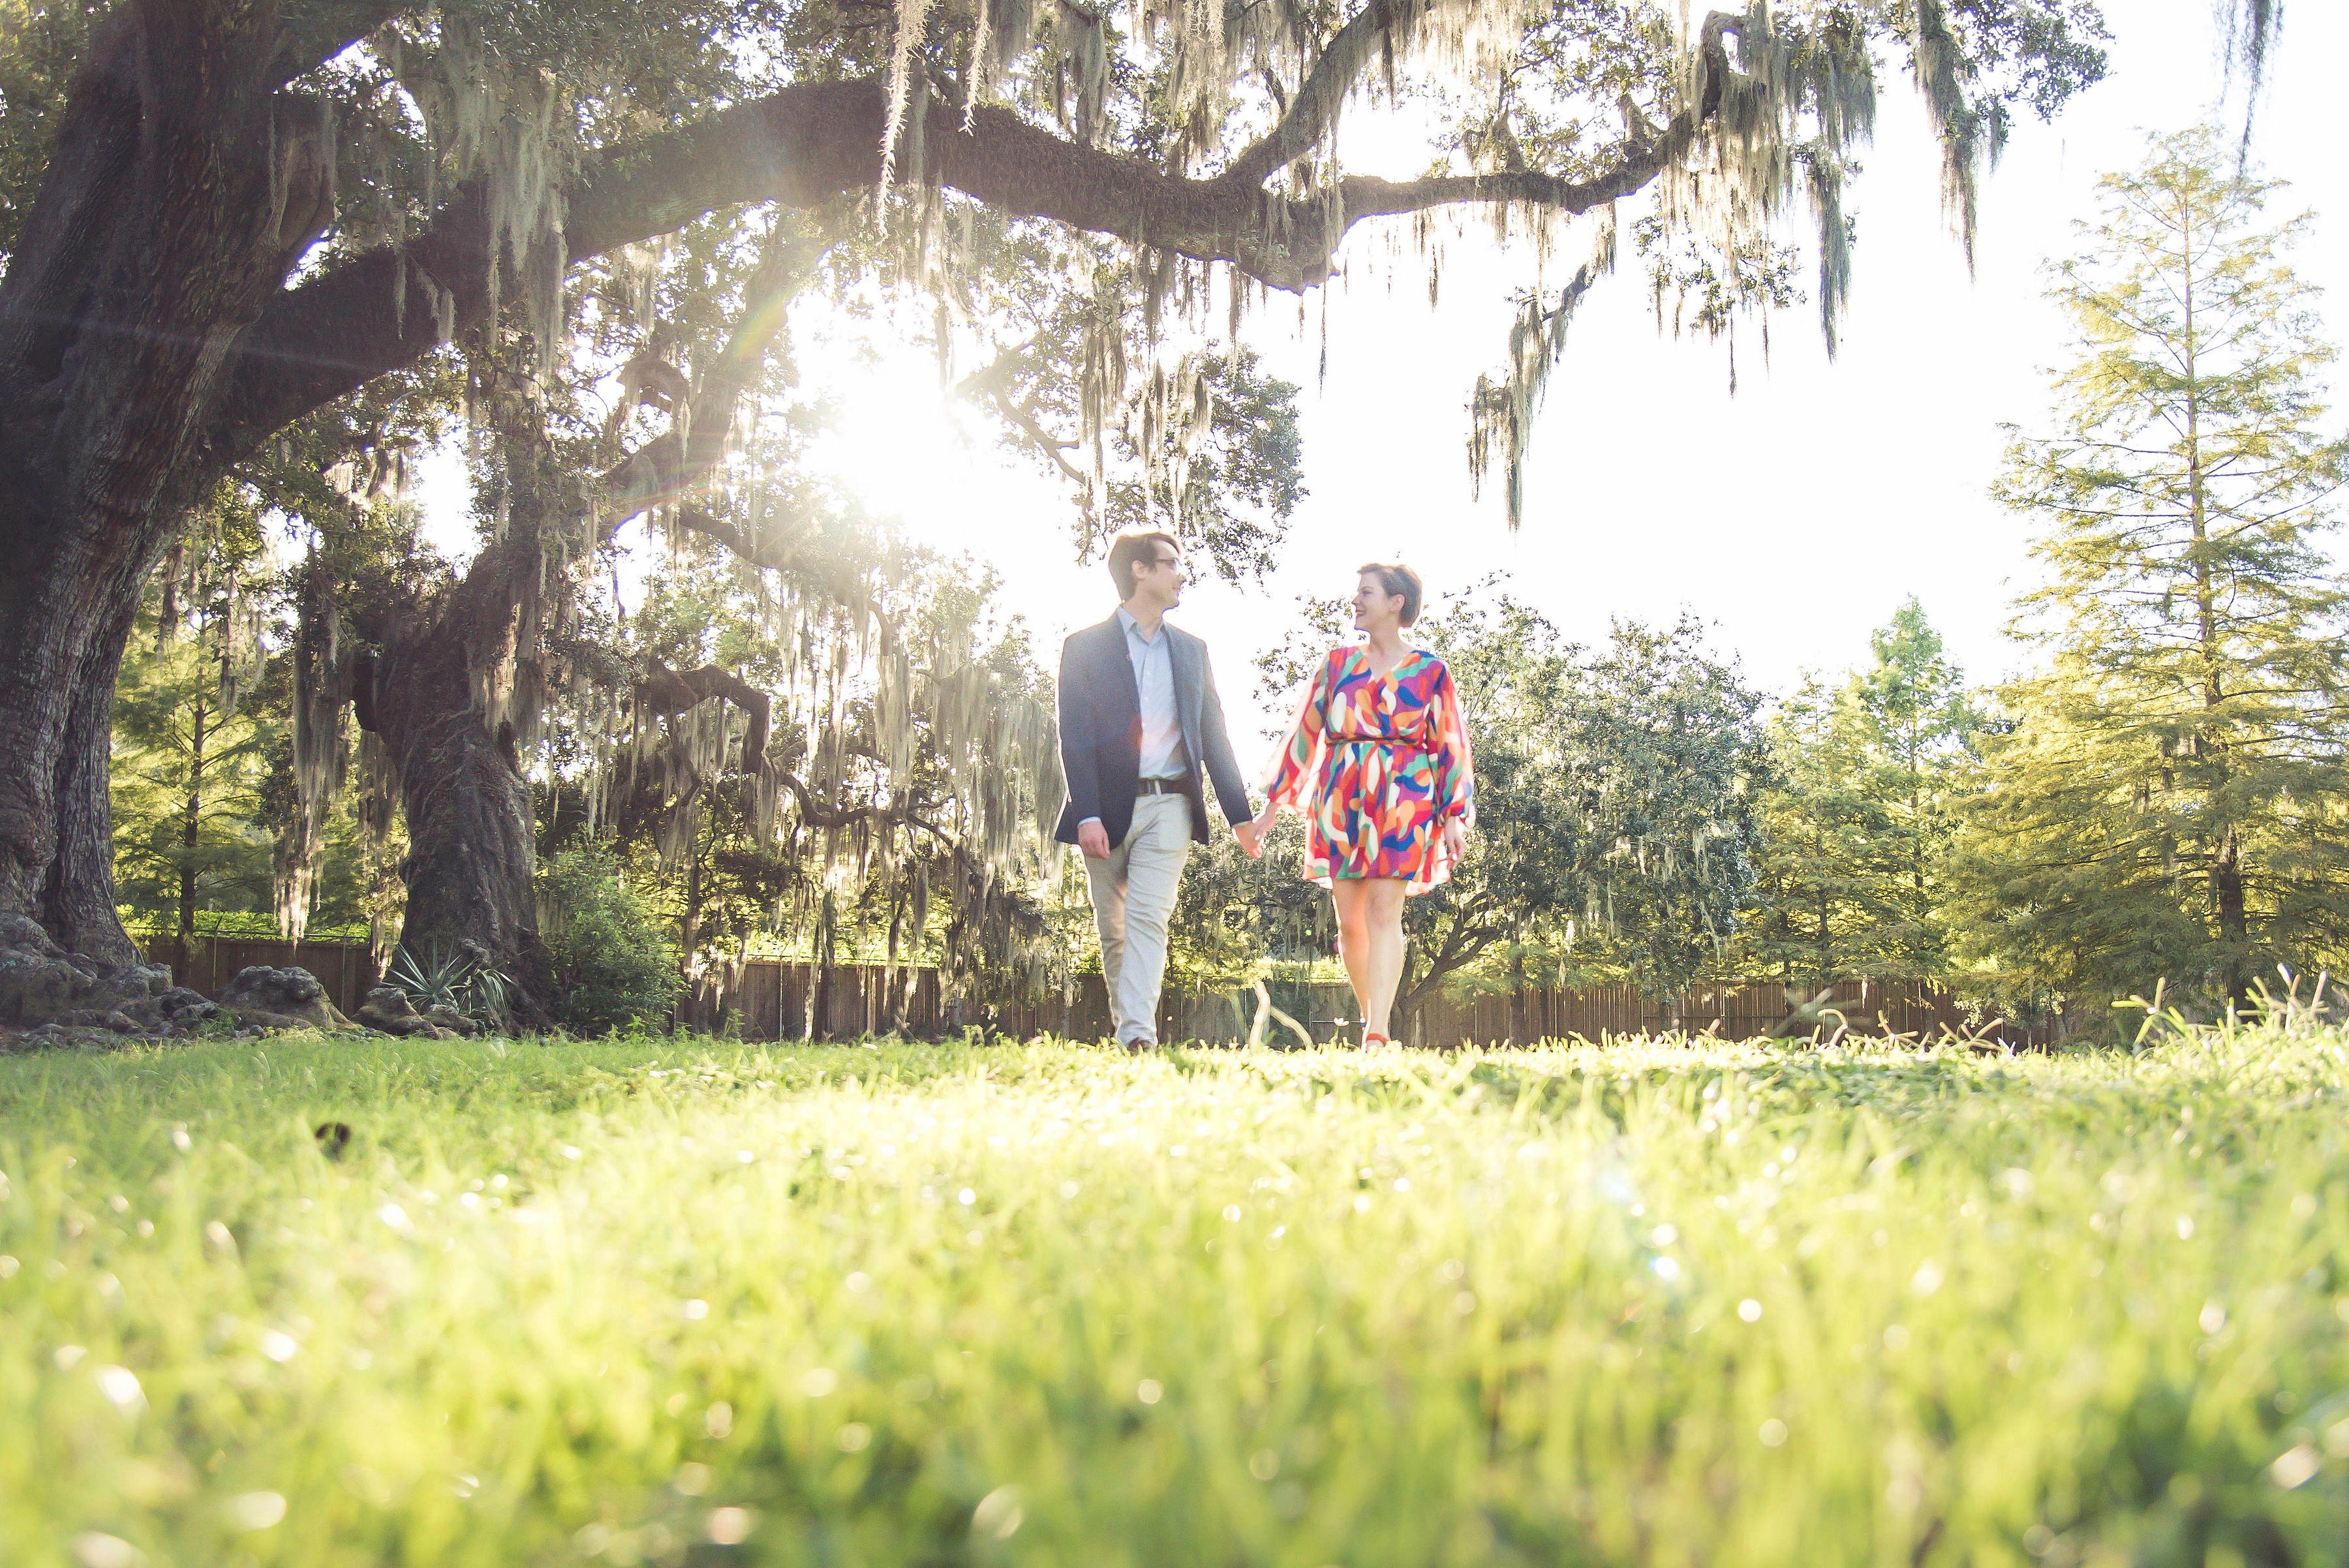 The Wedding Website of Kaitlyn Tholen and Peter Doley